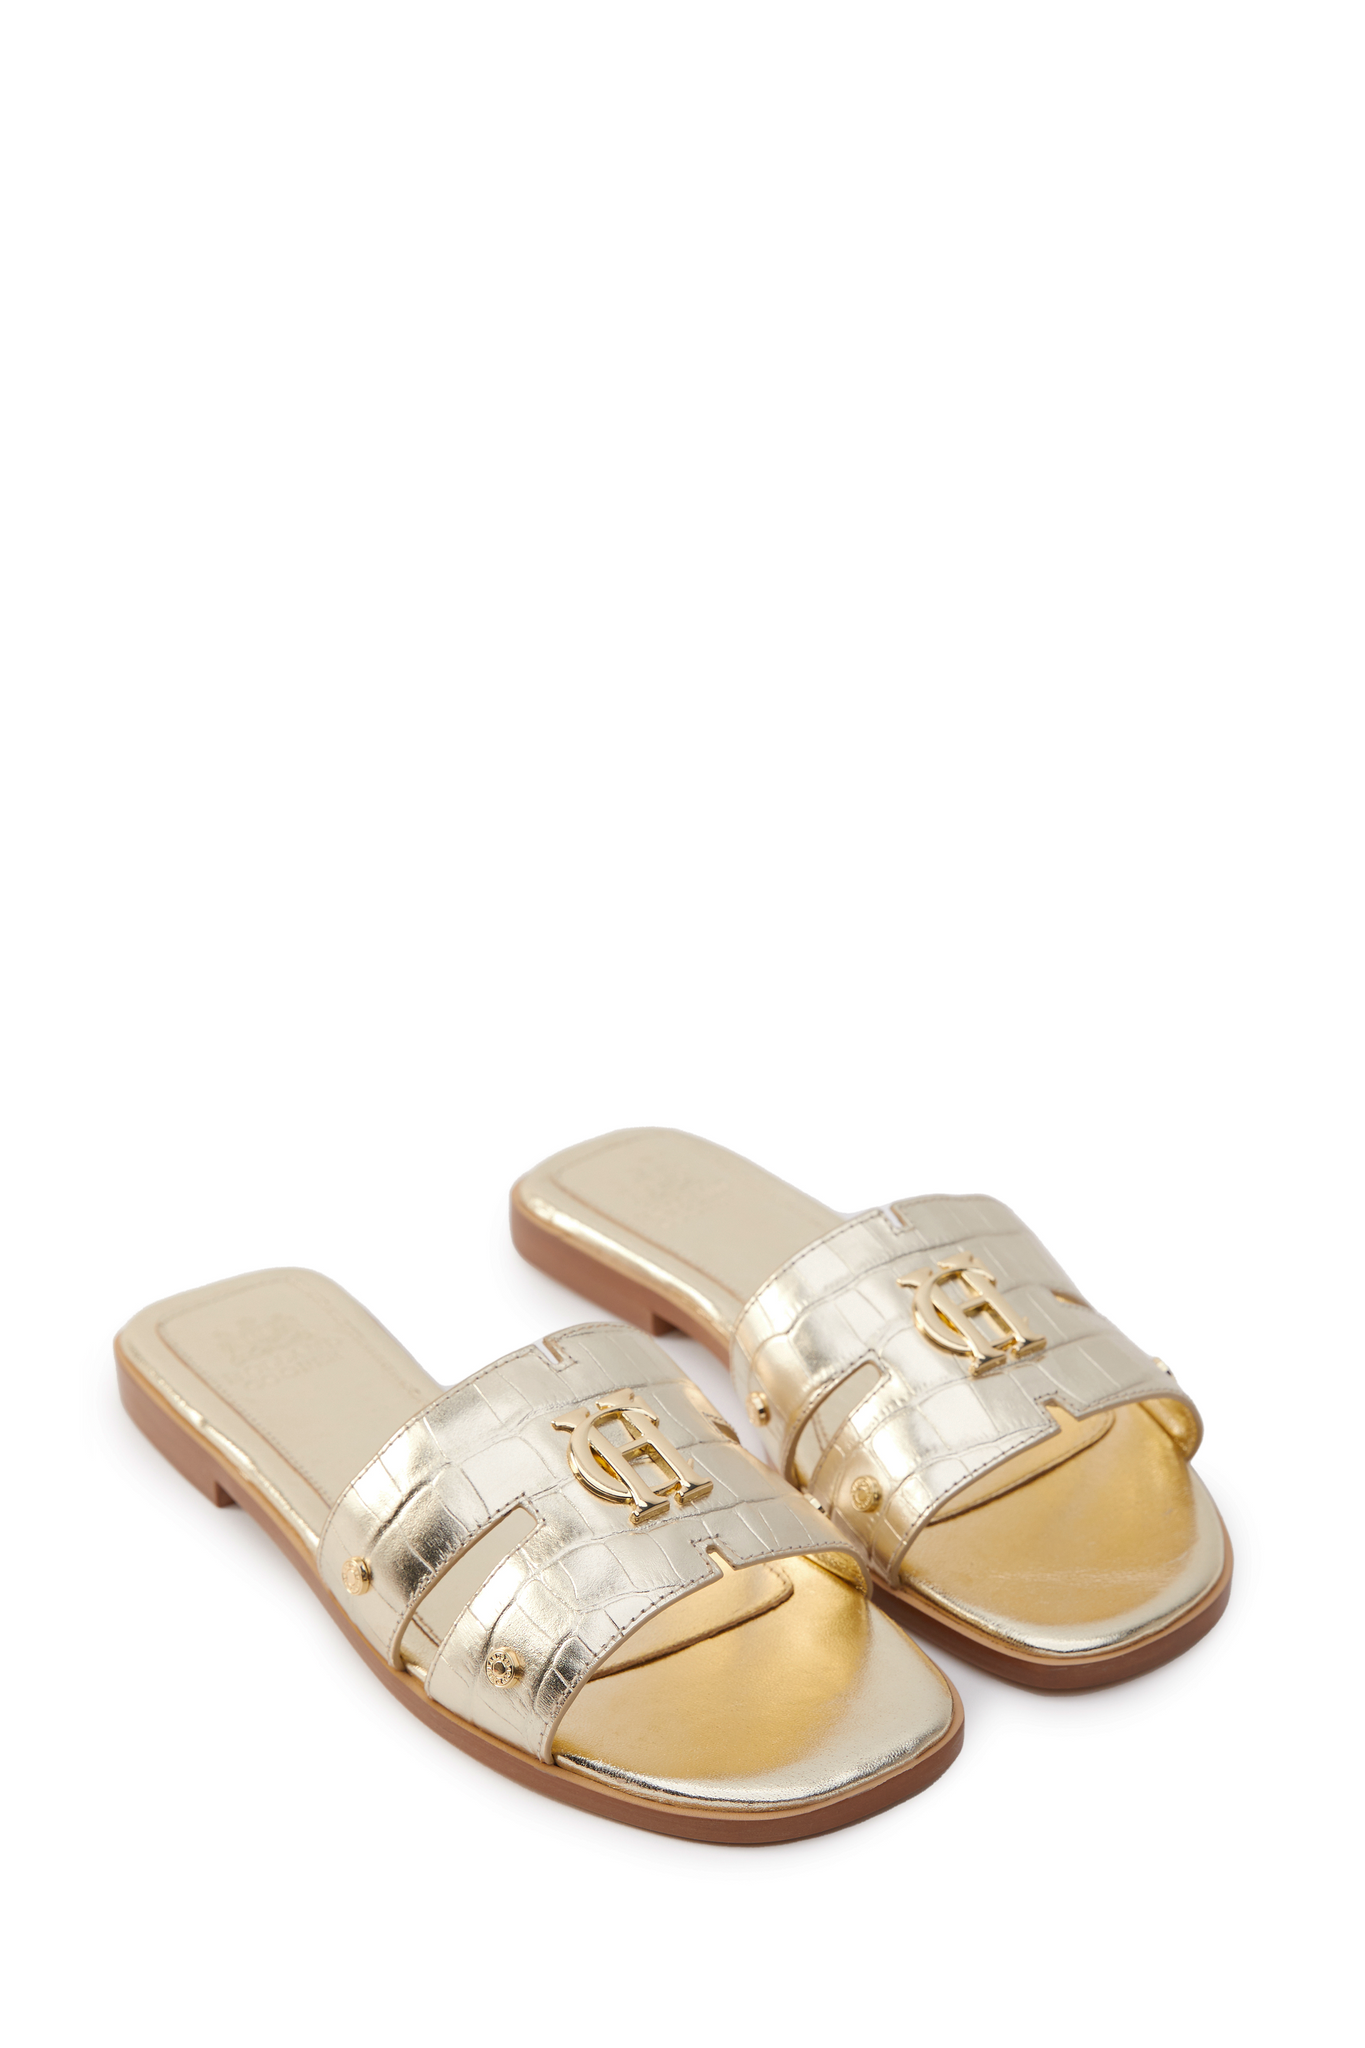 Gold croc embossed leather sliders with a tan leather sole and gold hardware. 